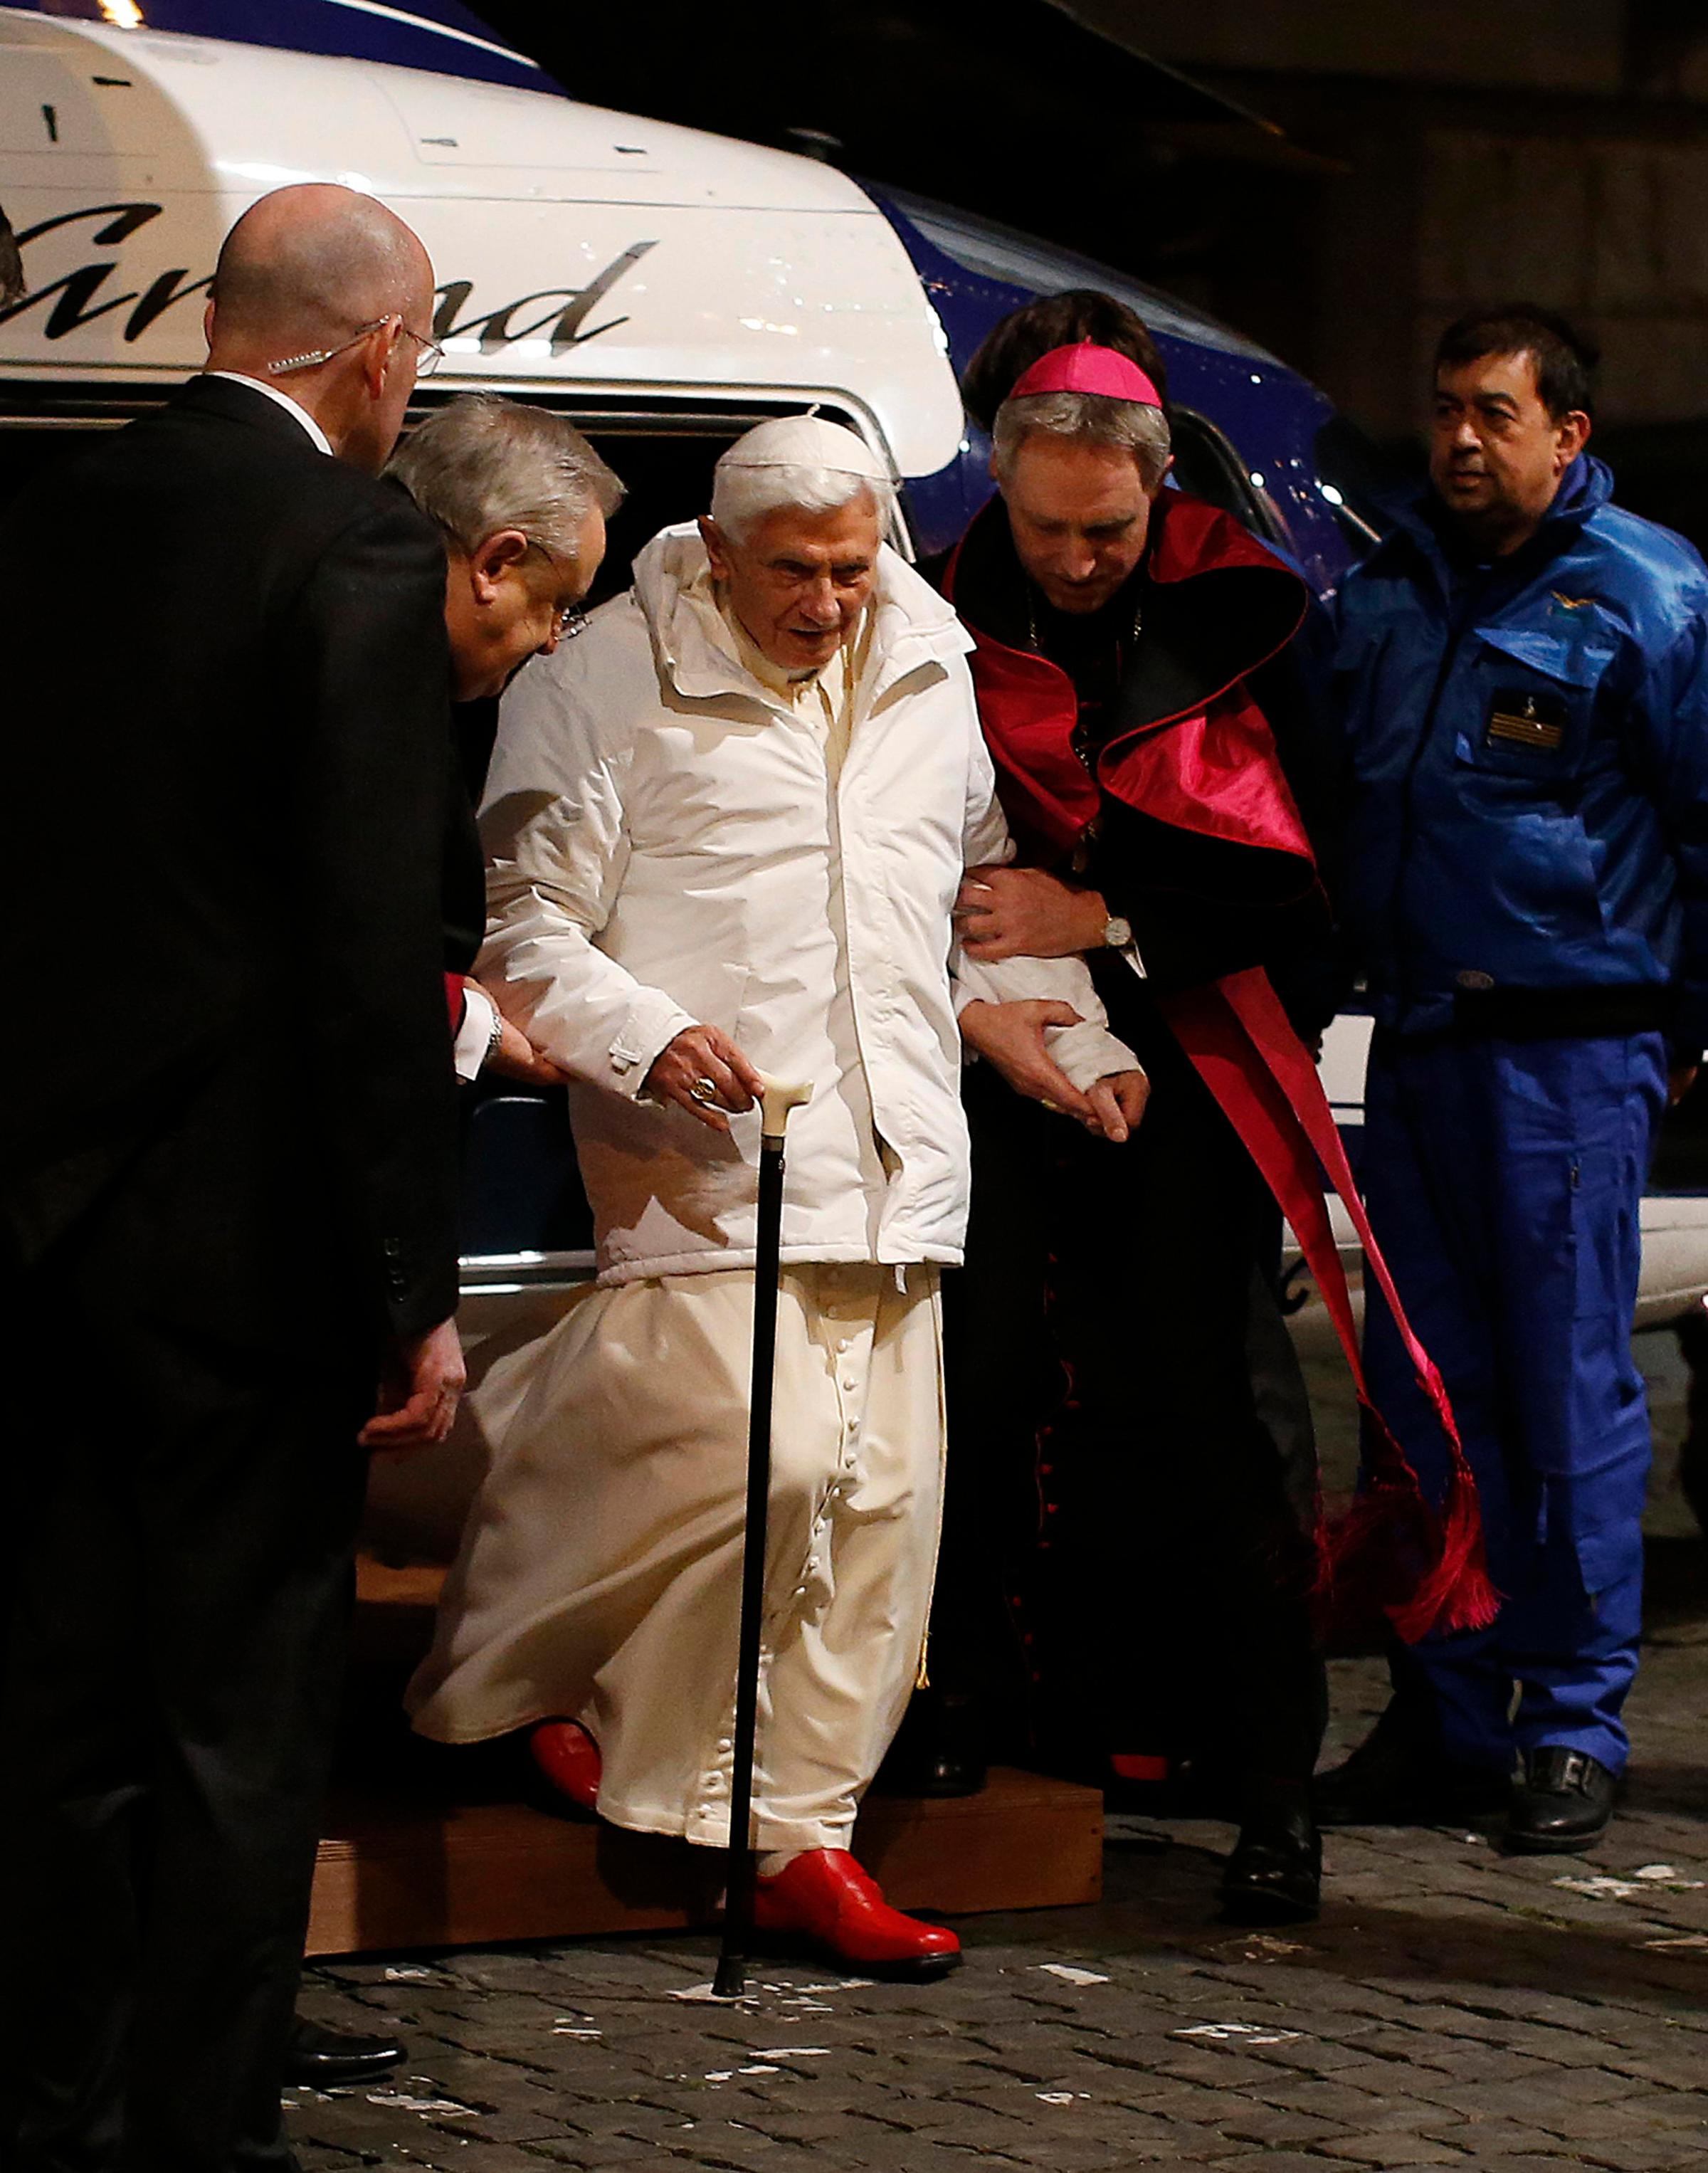 File photo of Pope Benedict XVI arriving for a meeting at the Romano Maggiore seminary in Rome